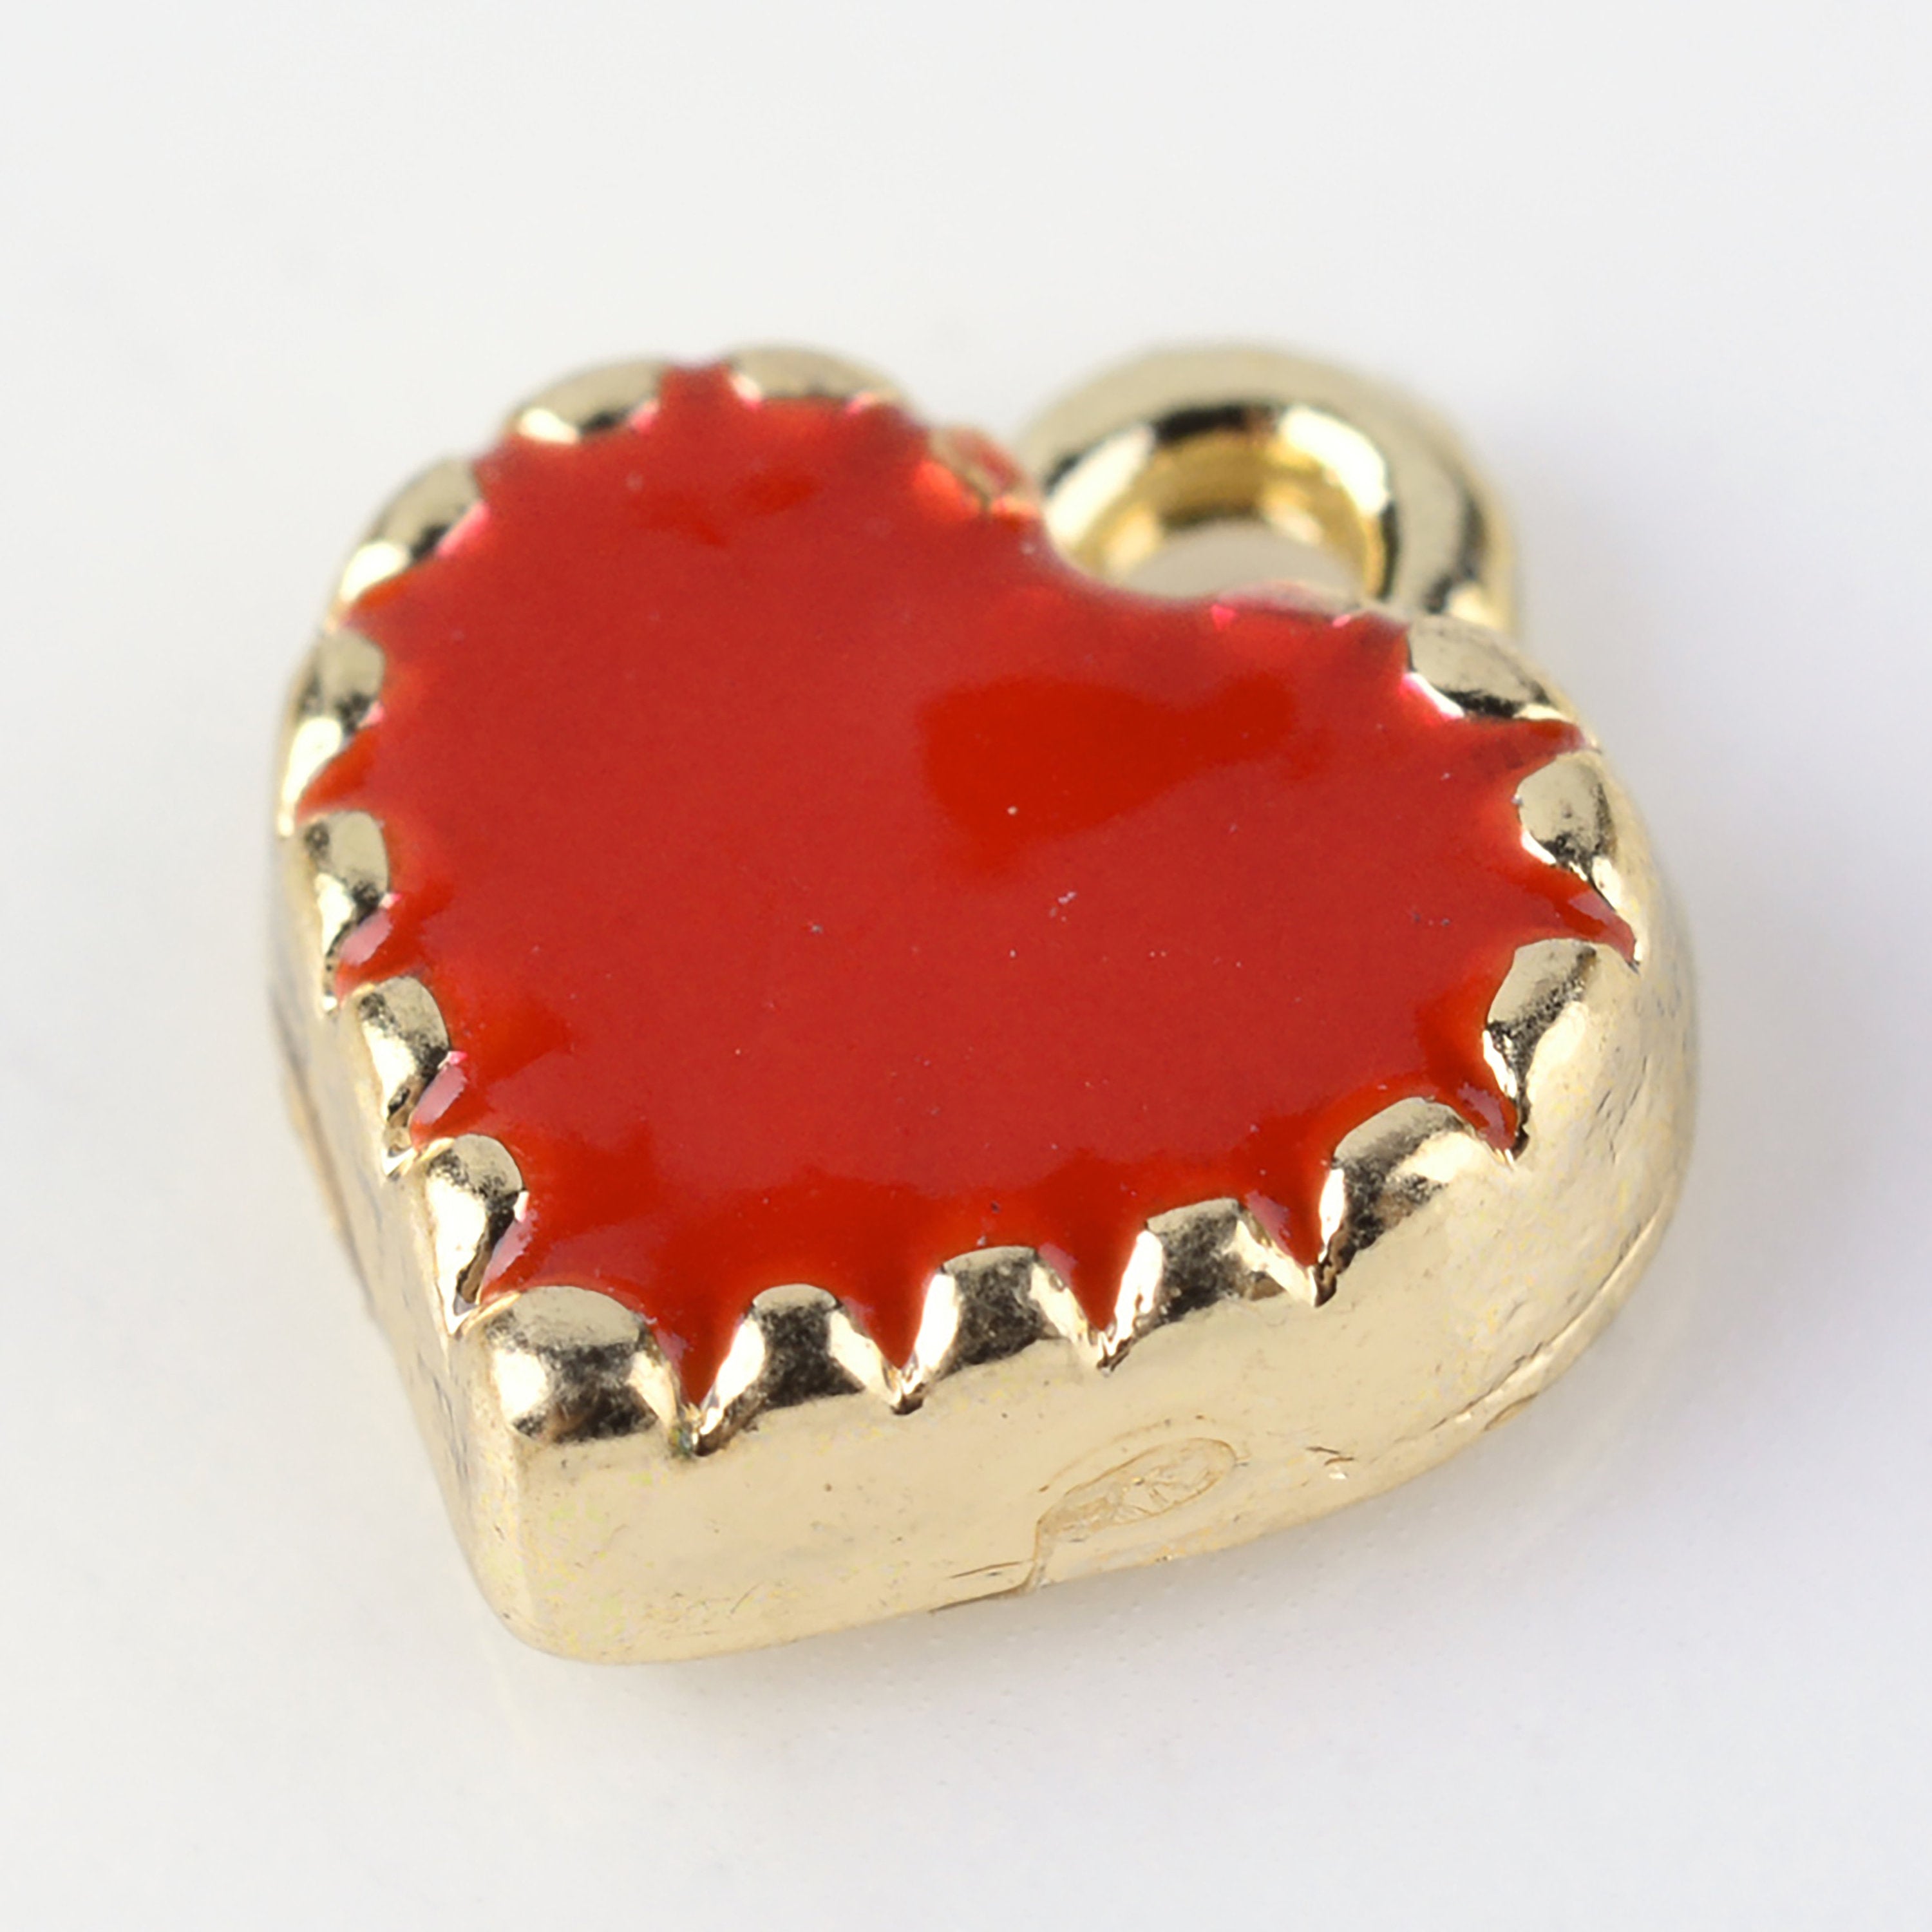 2pcs, 8x7.5x2.5mm, Alloy Enamel Pendant, Heart in Red and Gold Setting